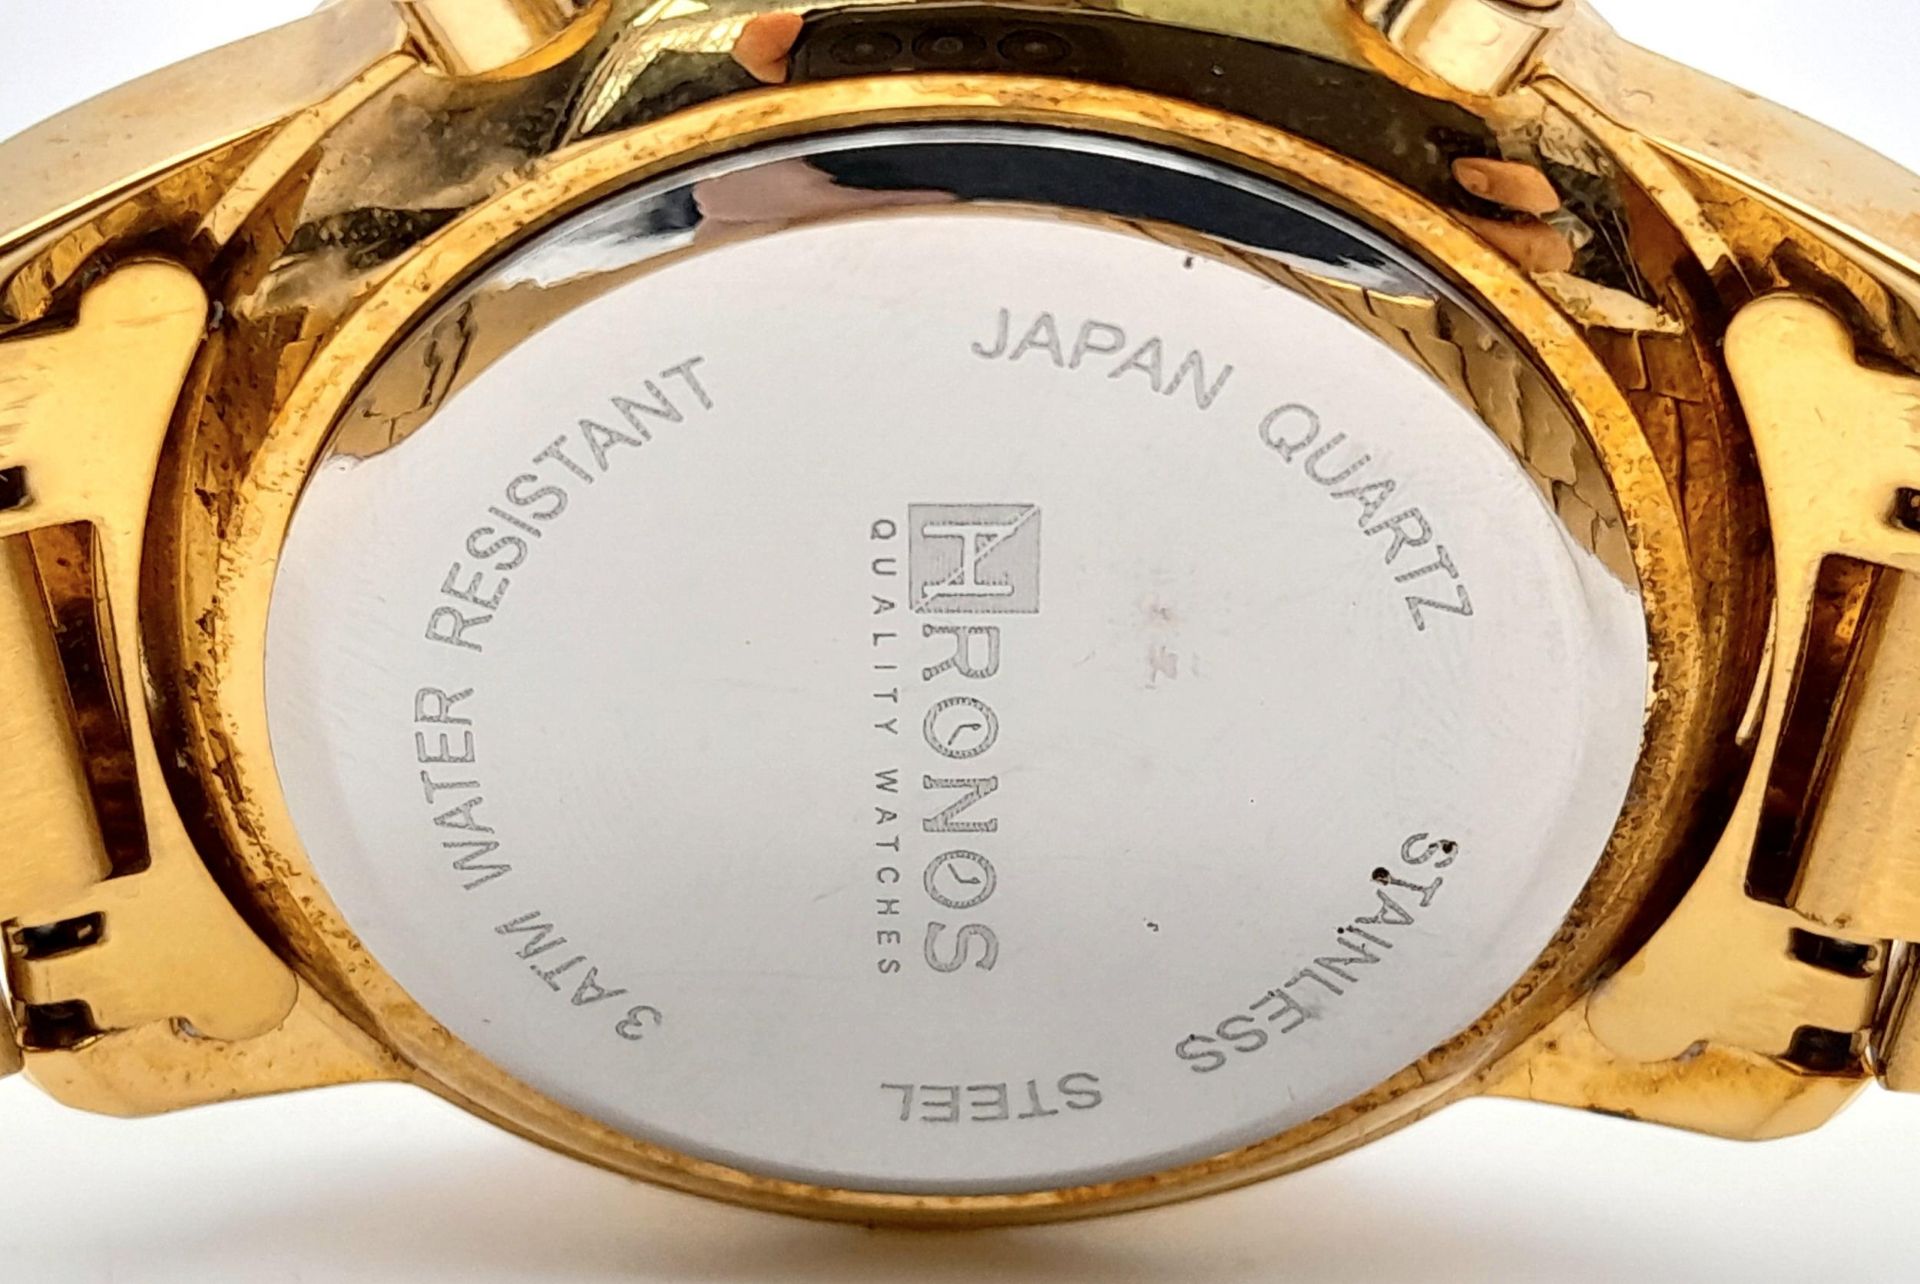 An Excellent Condition Men’s Gold Tone Japanese Sports Chronograph Date Watch by Hronos. 42mm - Image 5 of 6